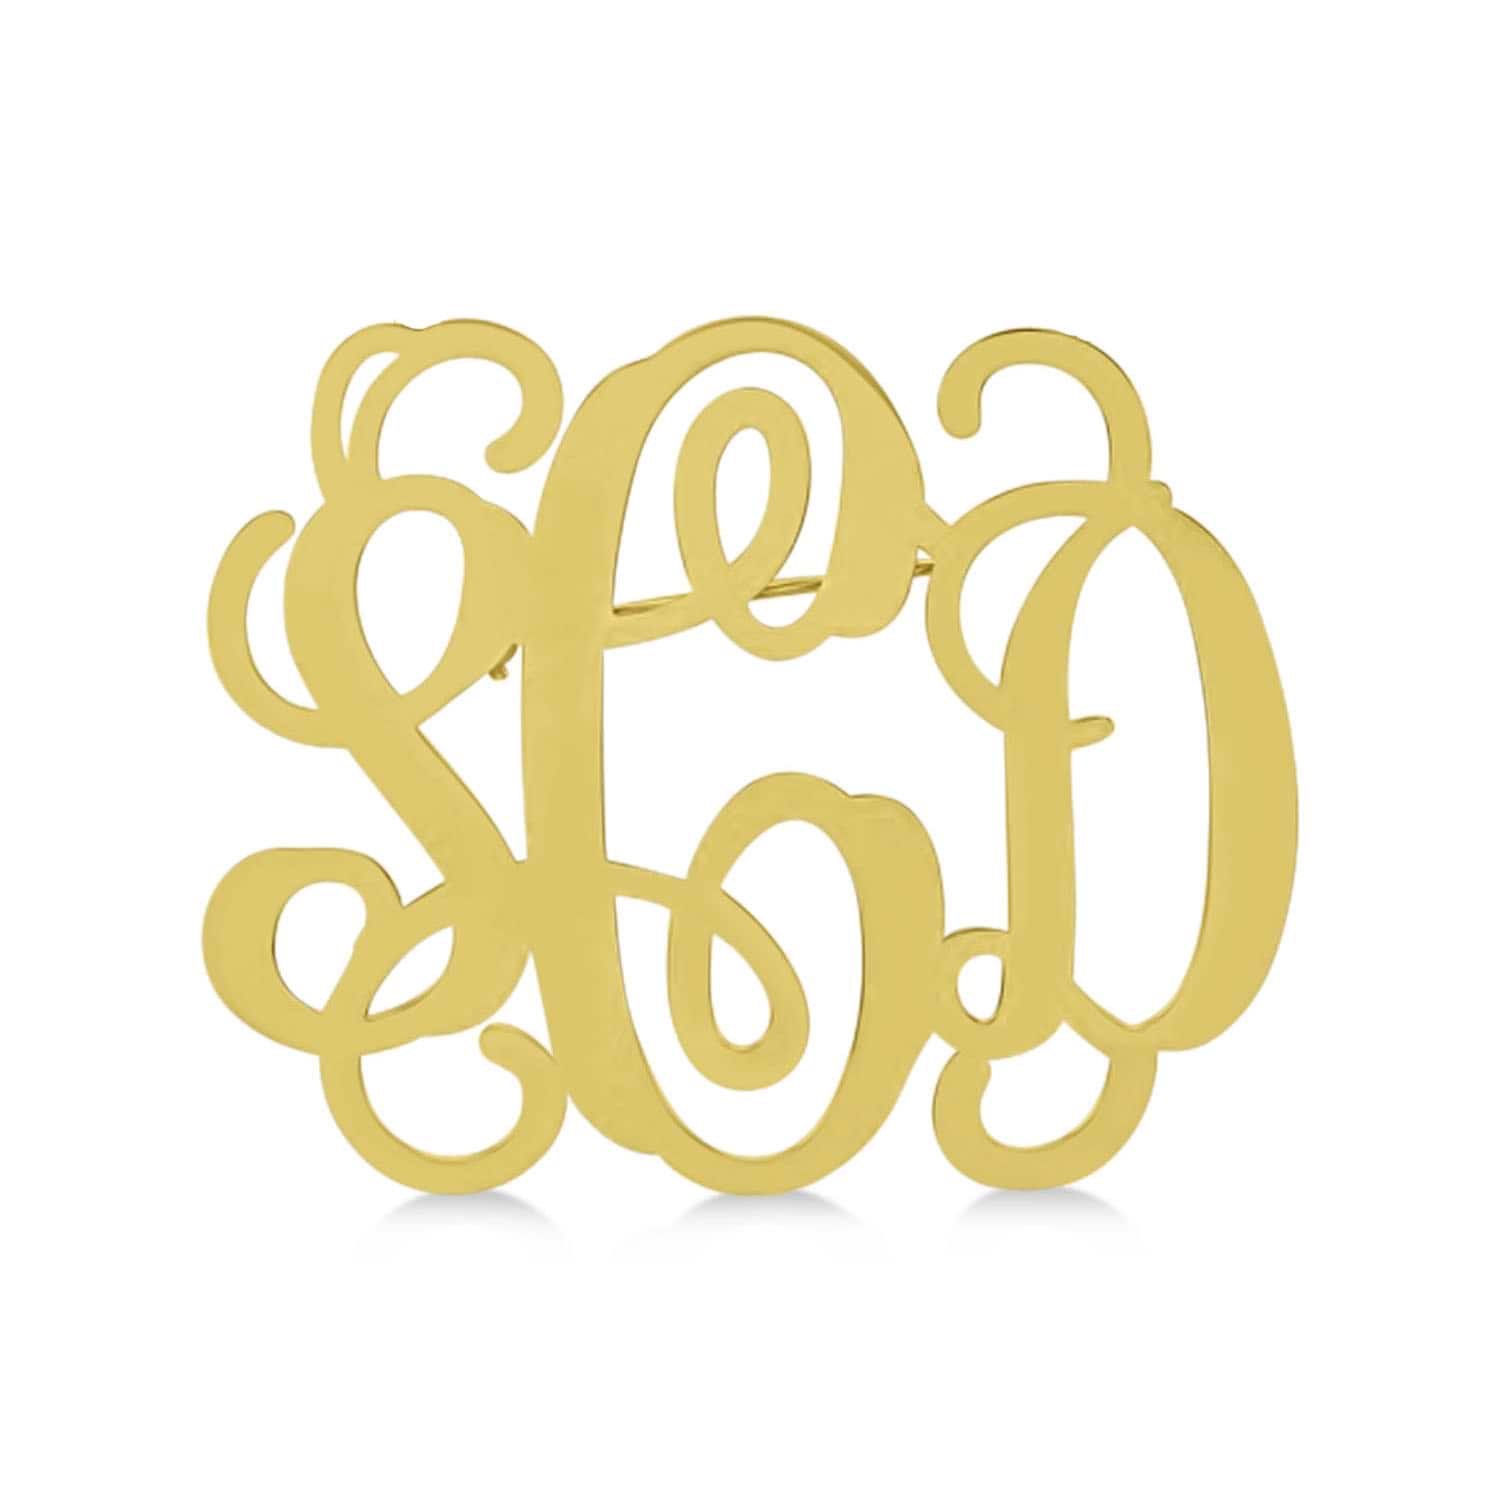 Initial Monogram Brooch Pin 14k Yellow Gold over Sterling Silver